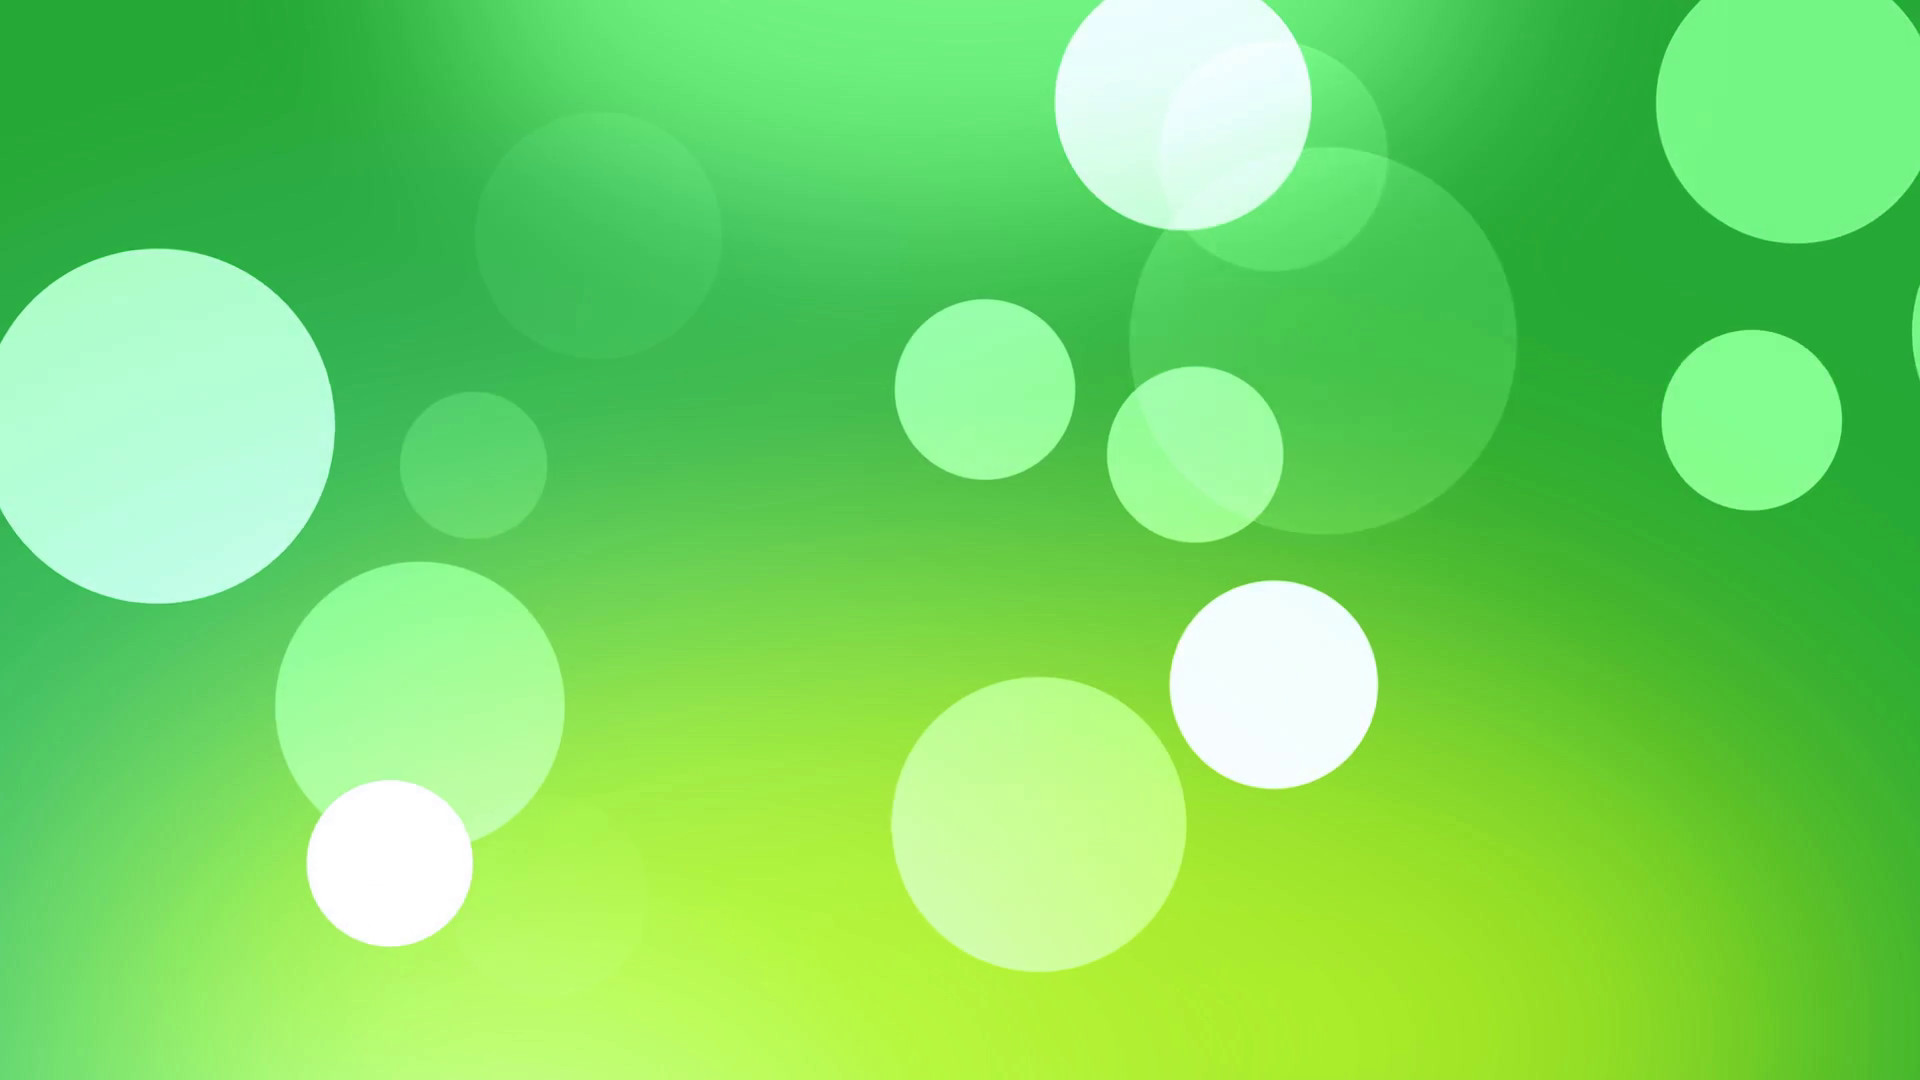 1920x1080 8 Clean Green Yellow Nature White Soft Backgrounds Pack . Loopable Stock  Video Footage - VideoBlocks